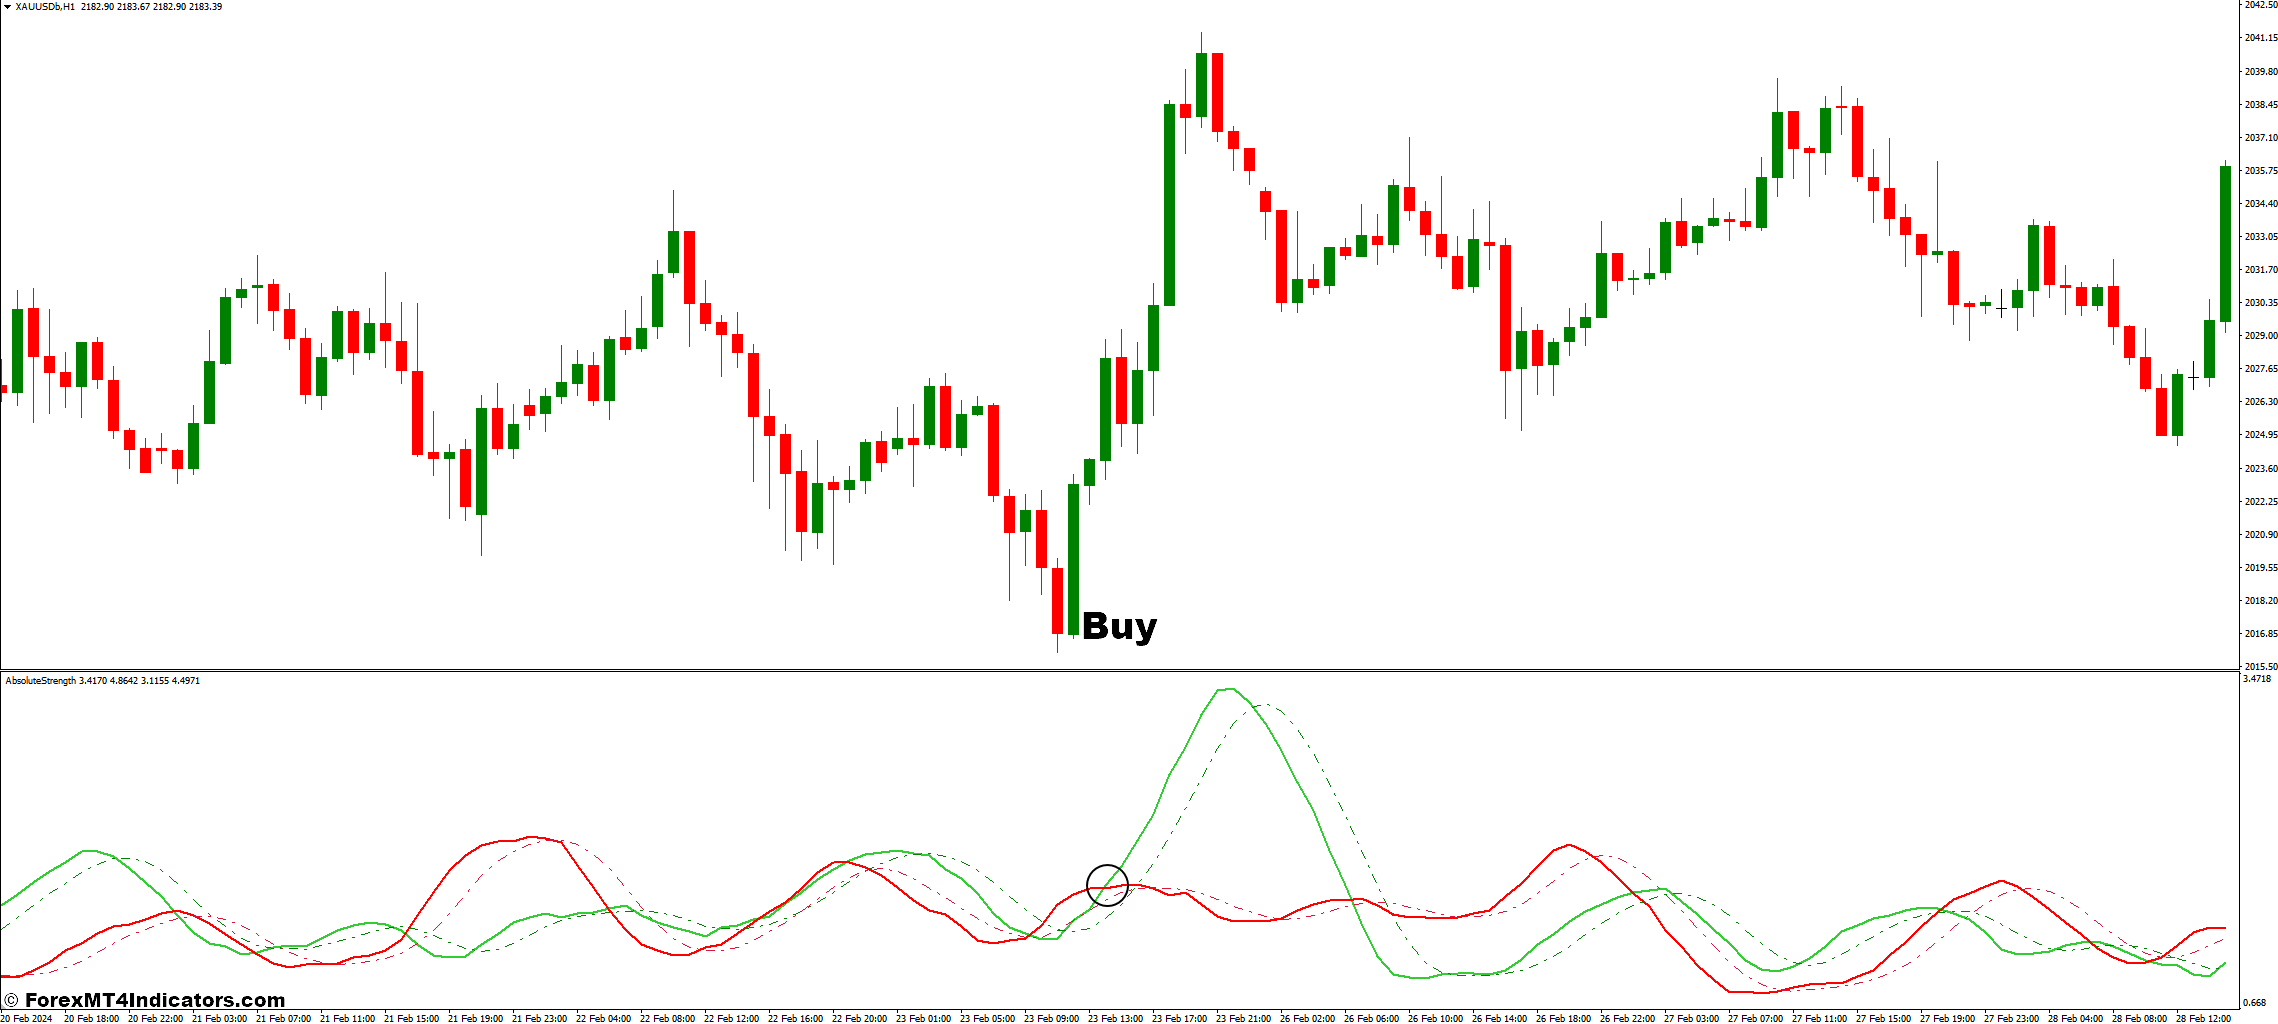 How To Trade With Absolute Strength Indicator - Buy Entry